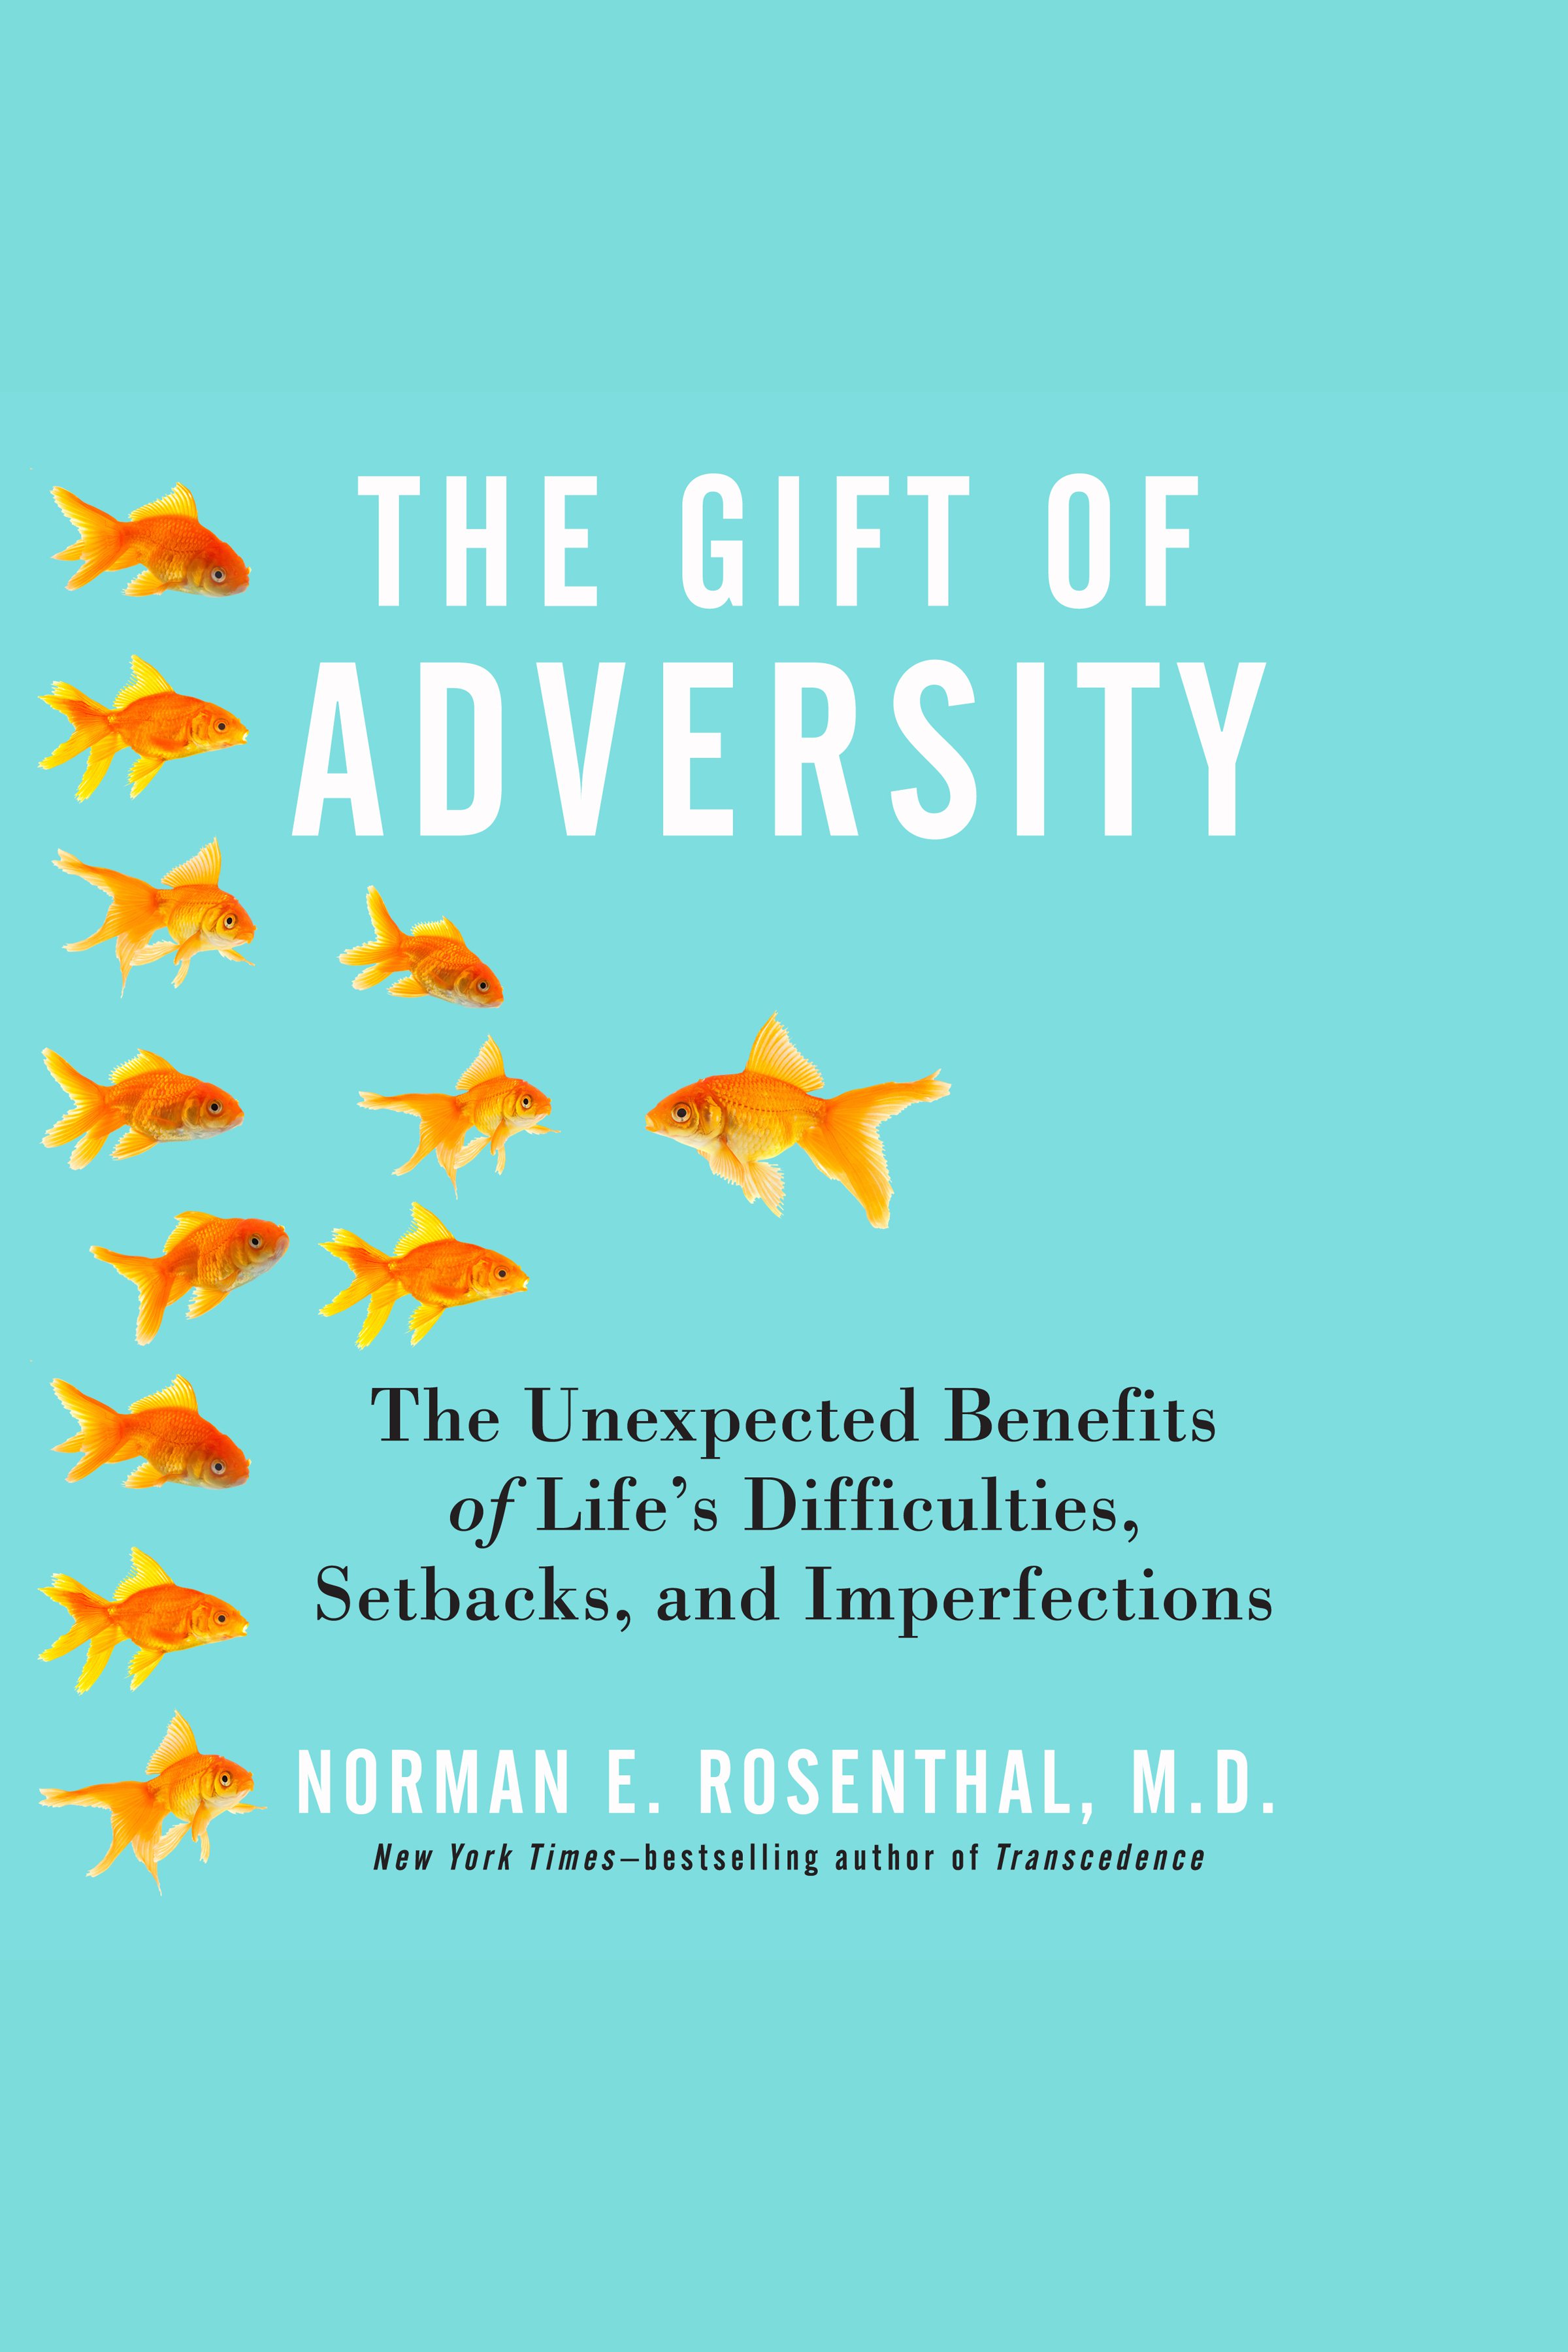 The gift of adversity  the unexpected benefits of life's difficulties, setbacks, and imperfections cover image